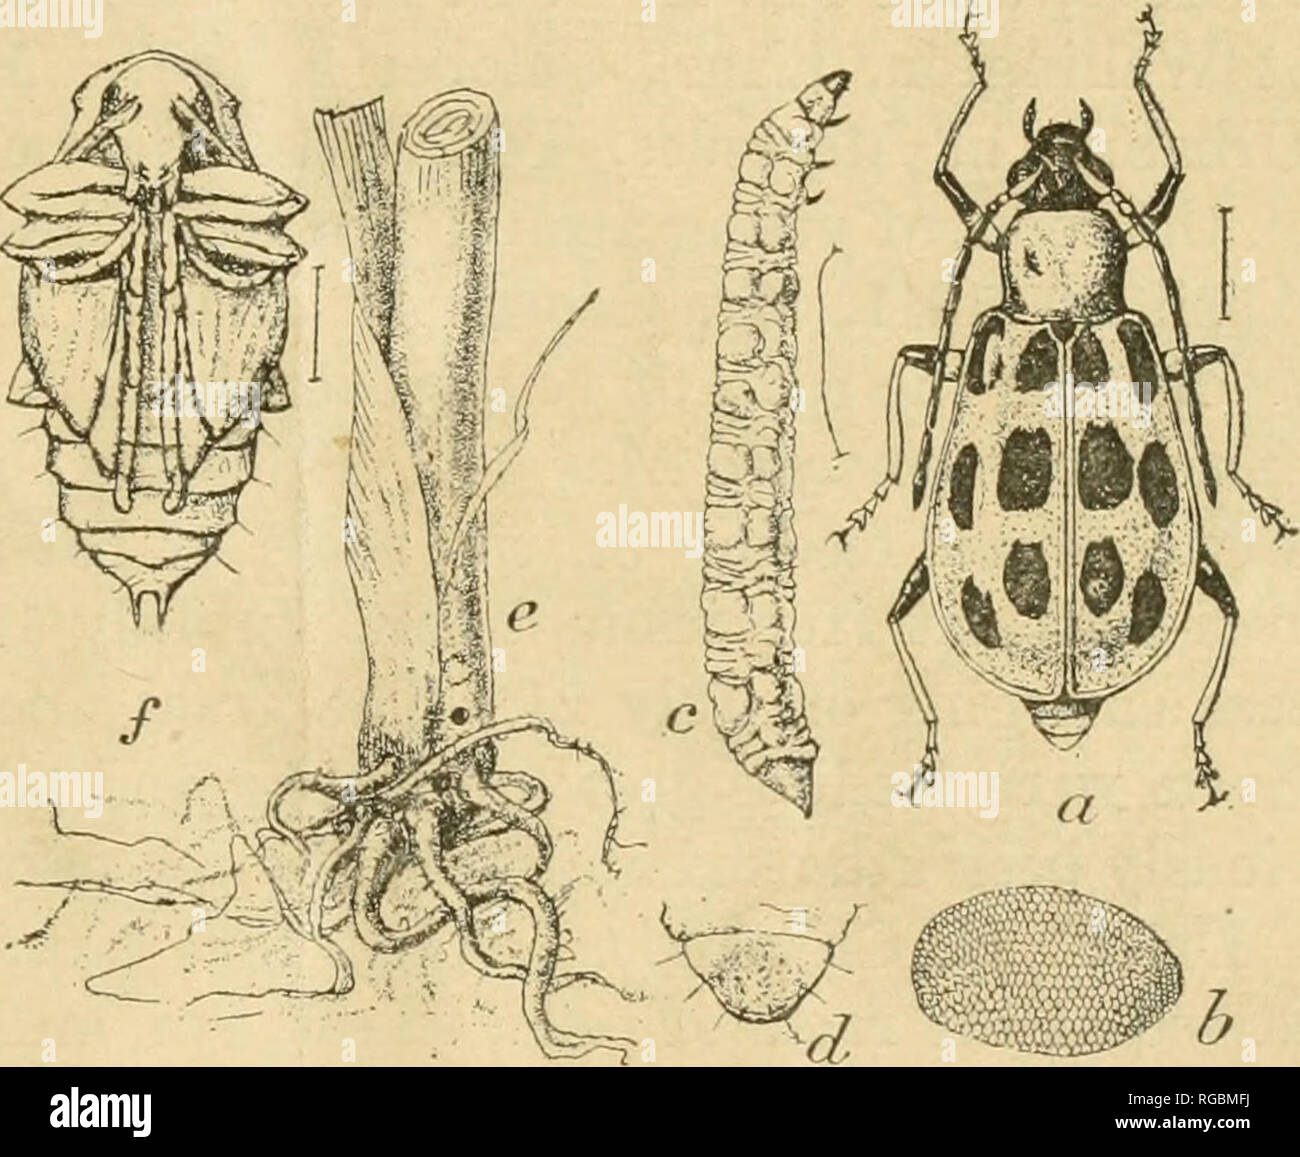 . Bulletin of the U.S. Department of Agriculture. Agriculture. '/n THE SOUTHERN CORN ROOTWORM, OR BUDWORM. By F. M. Webster, In Charge of Cereal and Forage Fnsect Investigations. DISTRIBUTION. The parent of the southern corn root worm {Diahrotica duodeciin- piinctata Oliv.), or. as it is often termed, the biidworm, is a yellow or greenish-yellow beetle having 12 black spots on the back, as shown in figure 1, «, from which its specific name, meaning &quot; 12-spotte(l.&quot; is derived. It is closely allied to the almost equally common striped cucumber beetle {Dia- hrotica vlttata Fab.), and al Stock Photo